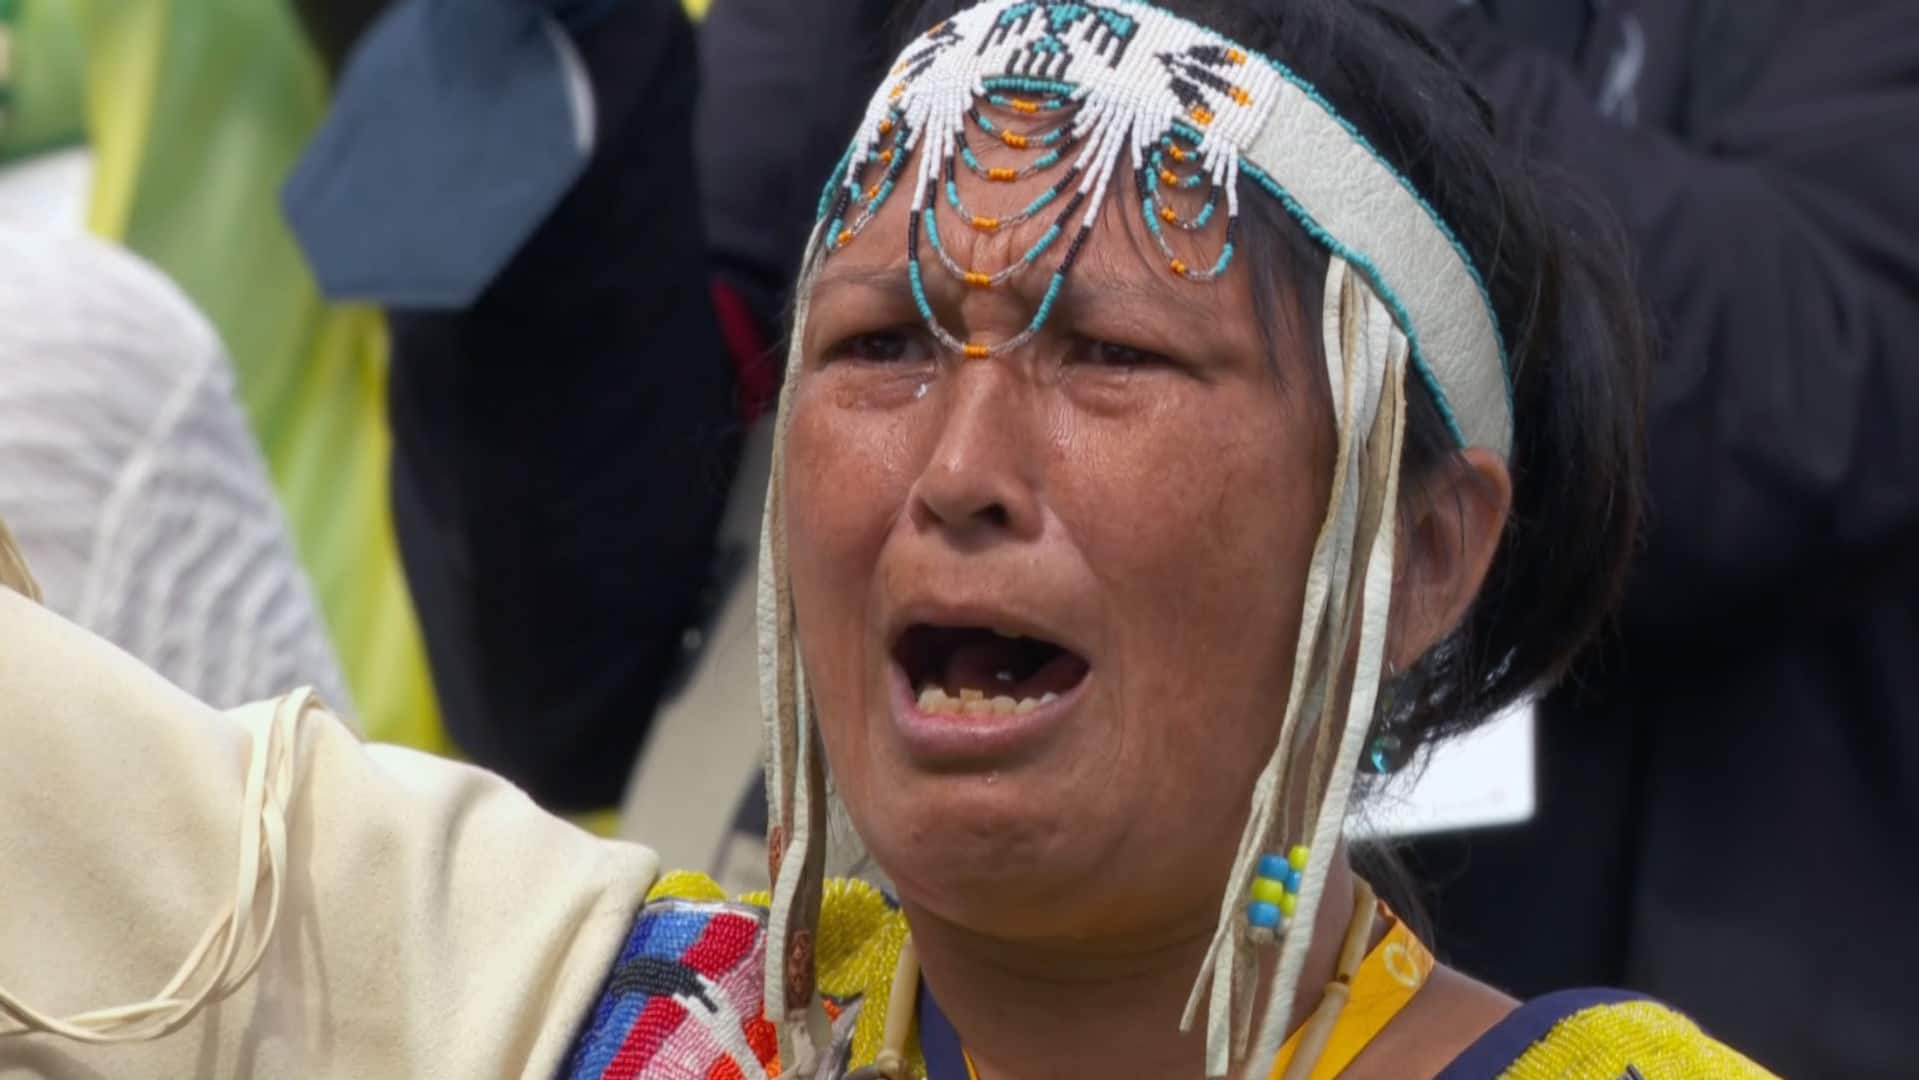 'I couldn't stay silent,' says Cree singer who performed powerful message for Pope Francis